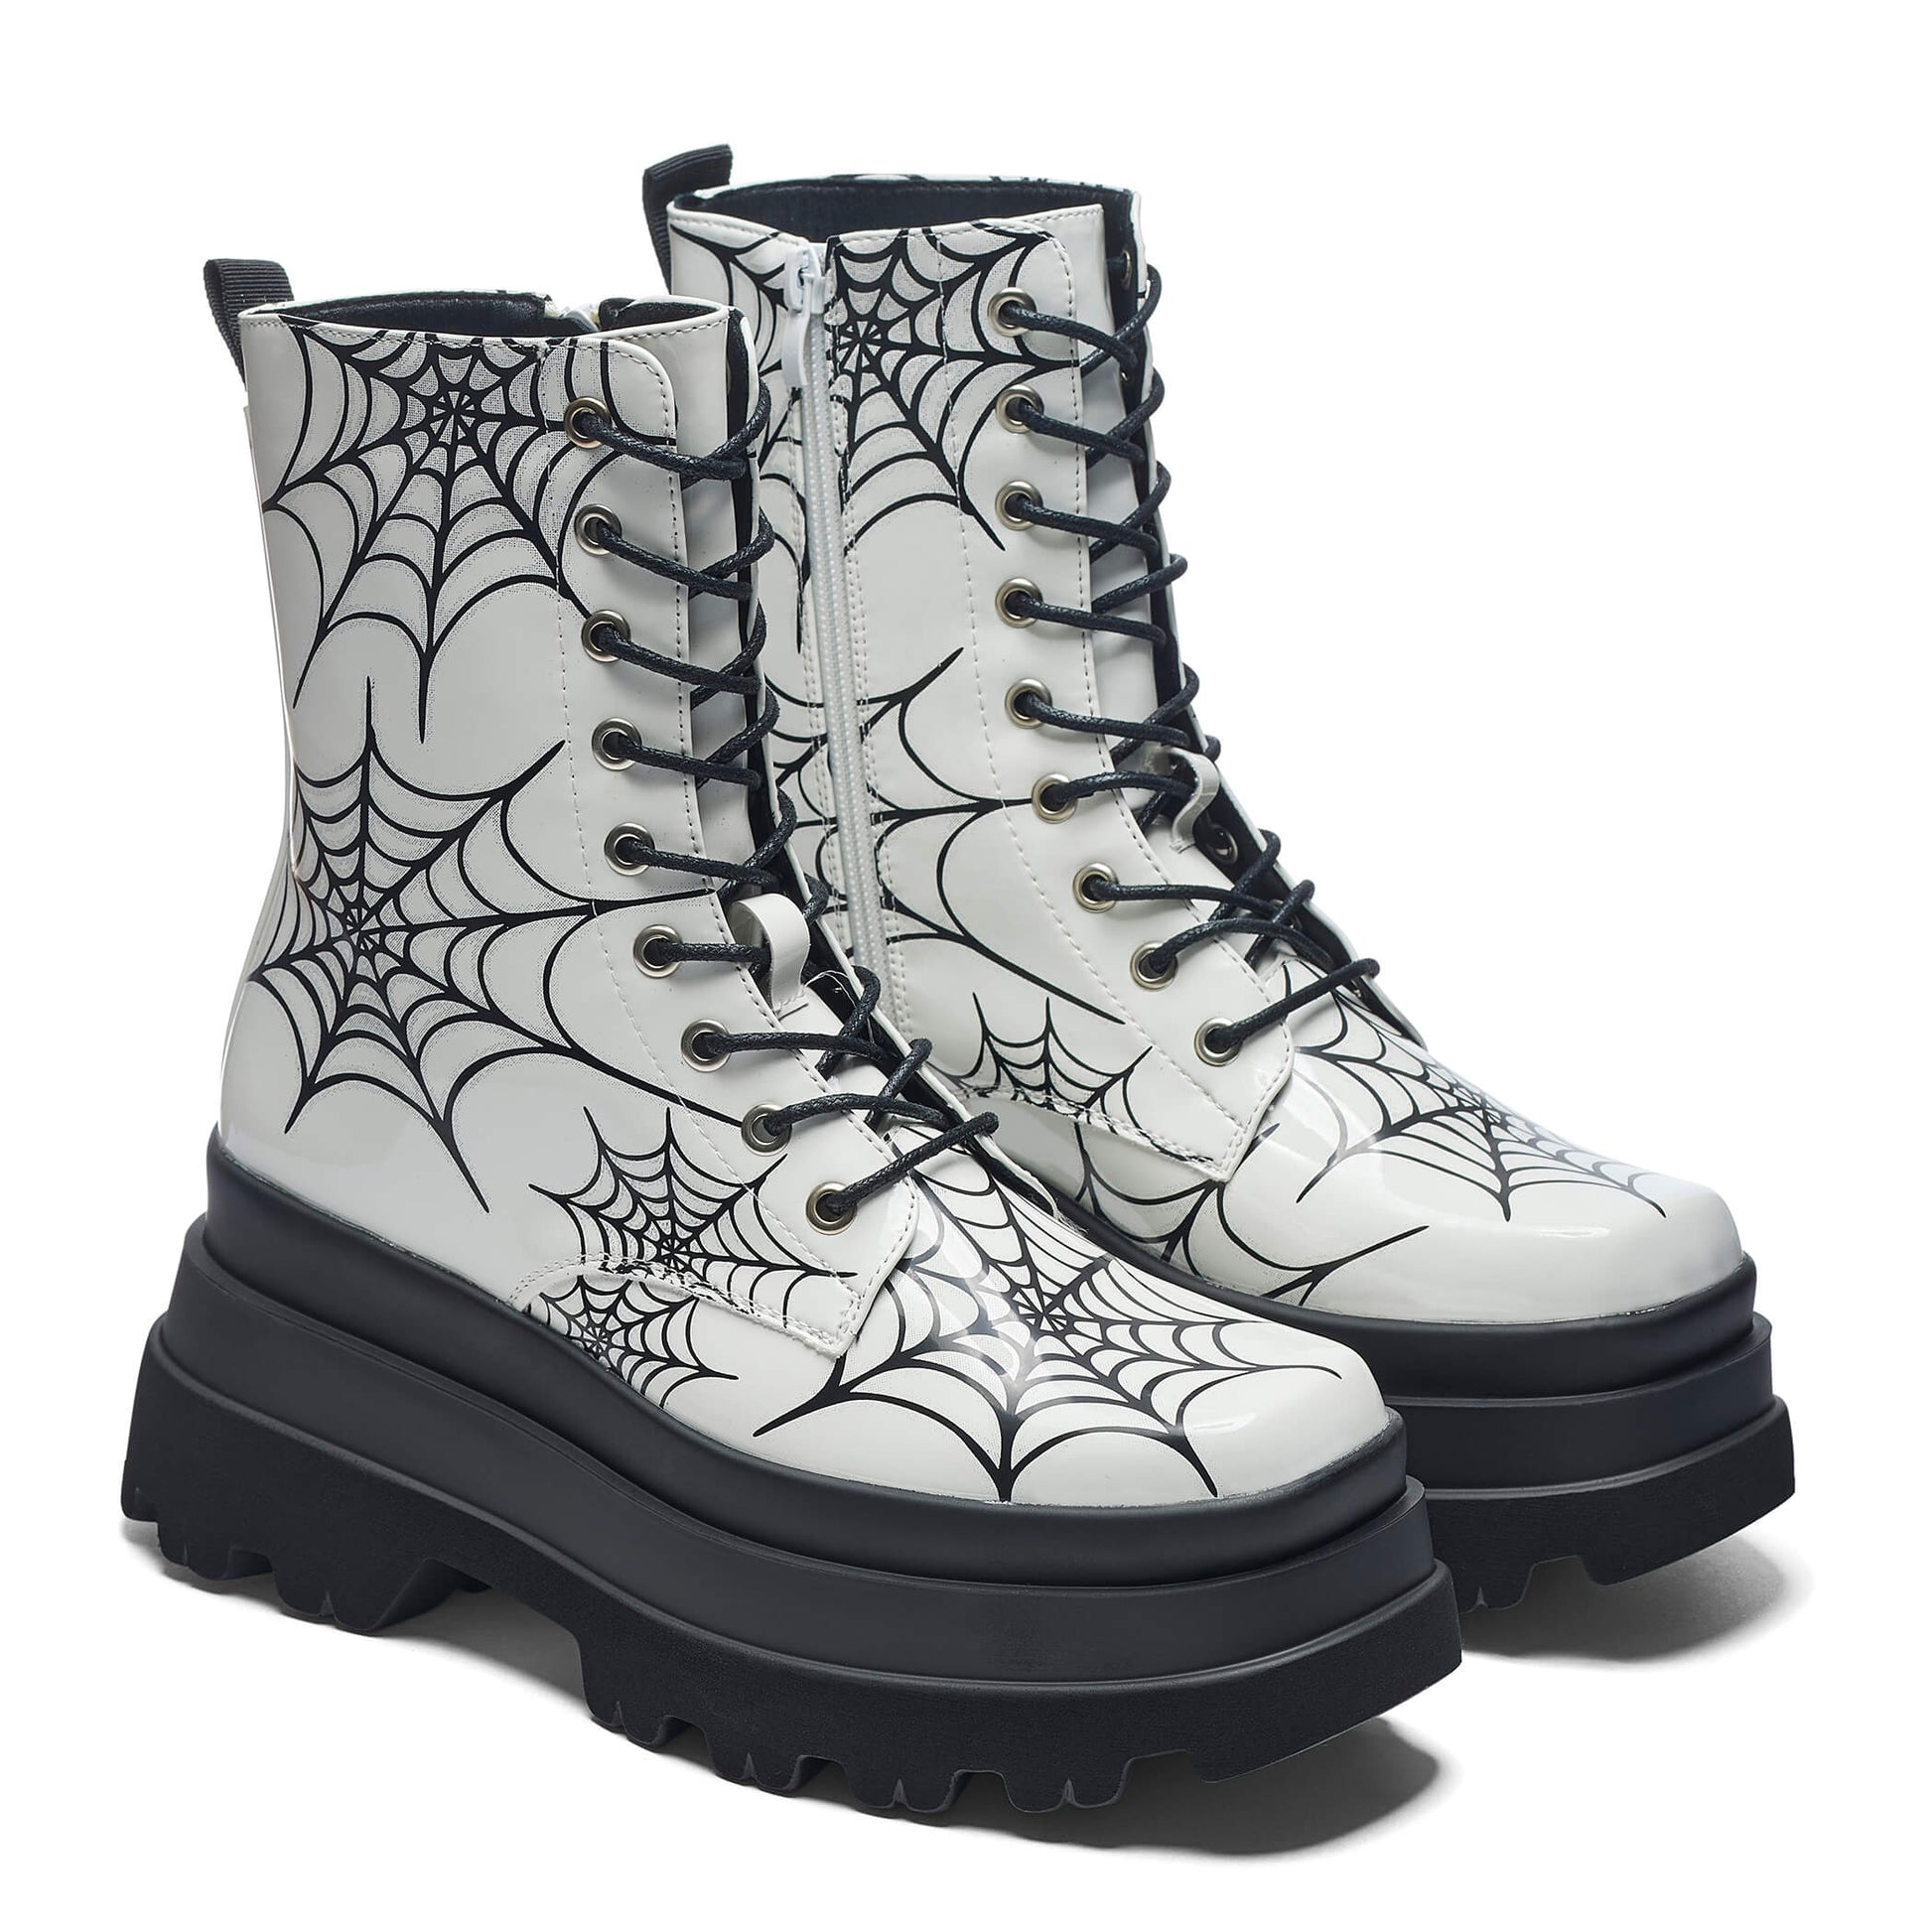 Web Trap Trident Boots - Ankle Boots - KOI Footwear - White - Three-Quarter View